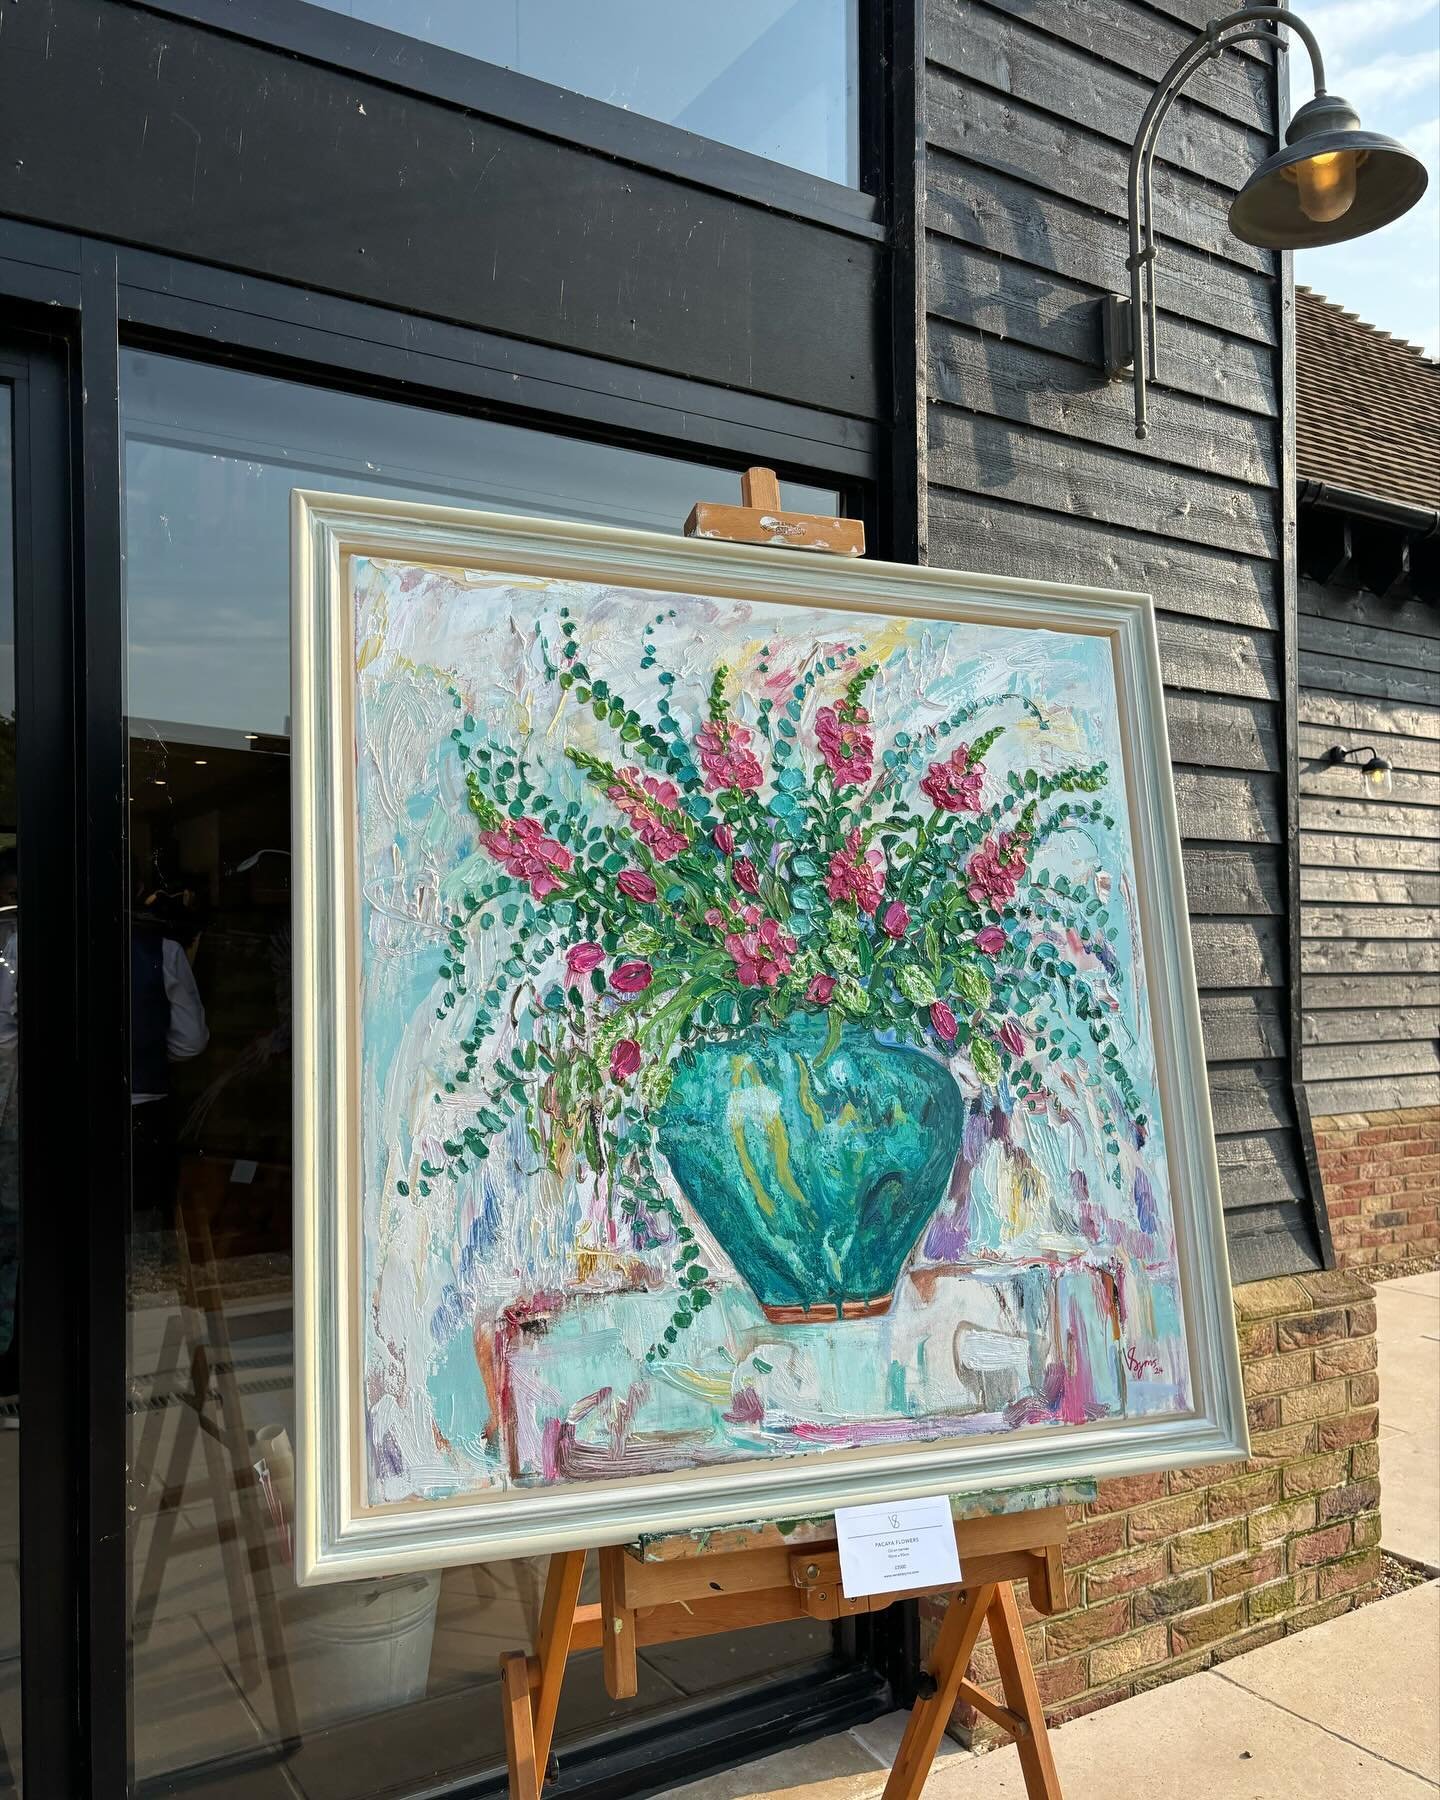 On Saturday evening, we hosted our first Art Exhibition at Kinsbrook. 

A huge thank you to the four fantastic artists who filled Kinsbrook Farmhouse with their beautiful creations - you were all a total delight to host and we know first hand how man